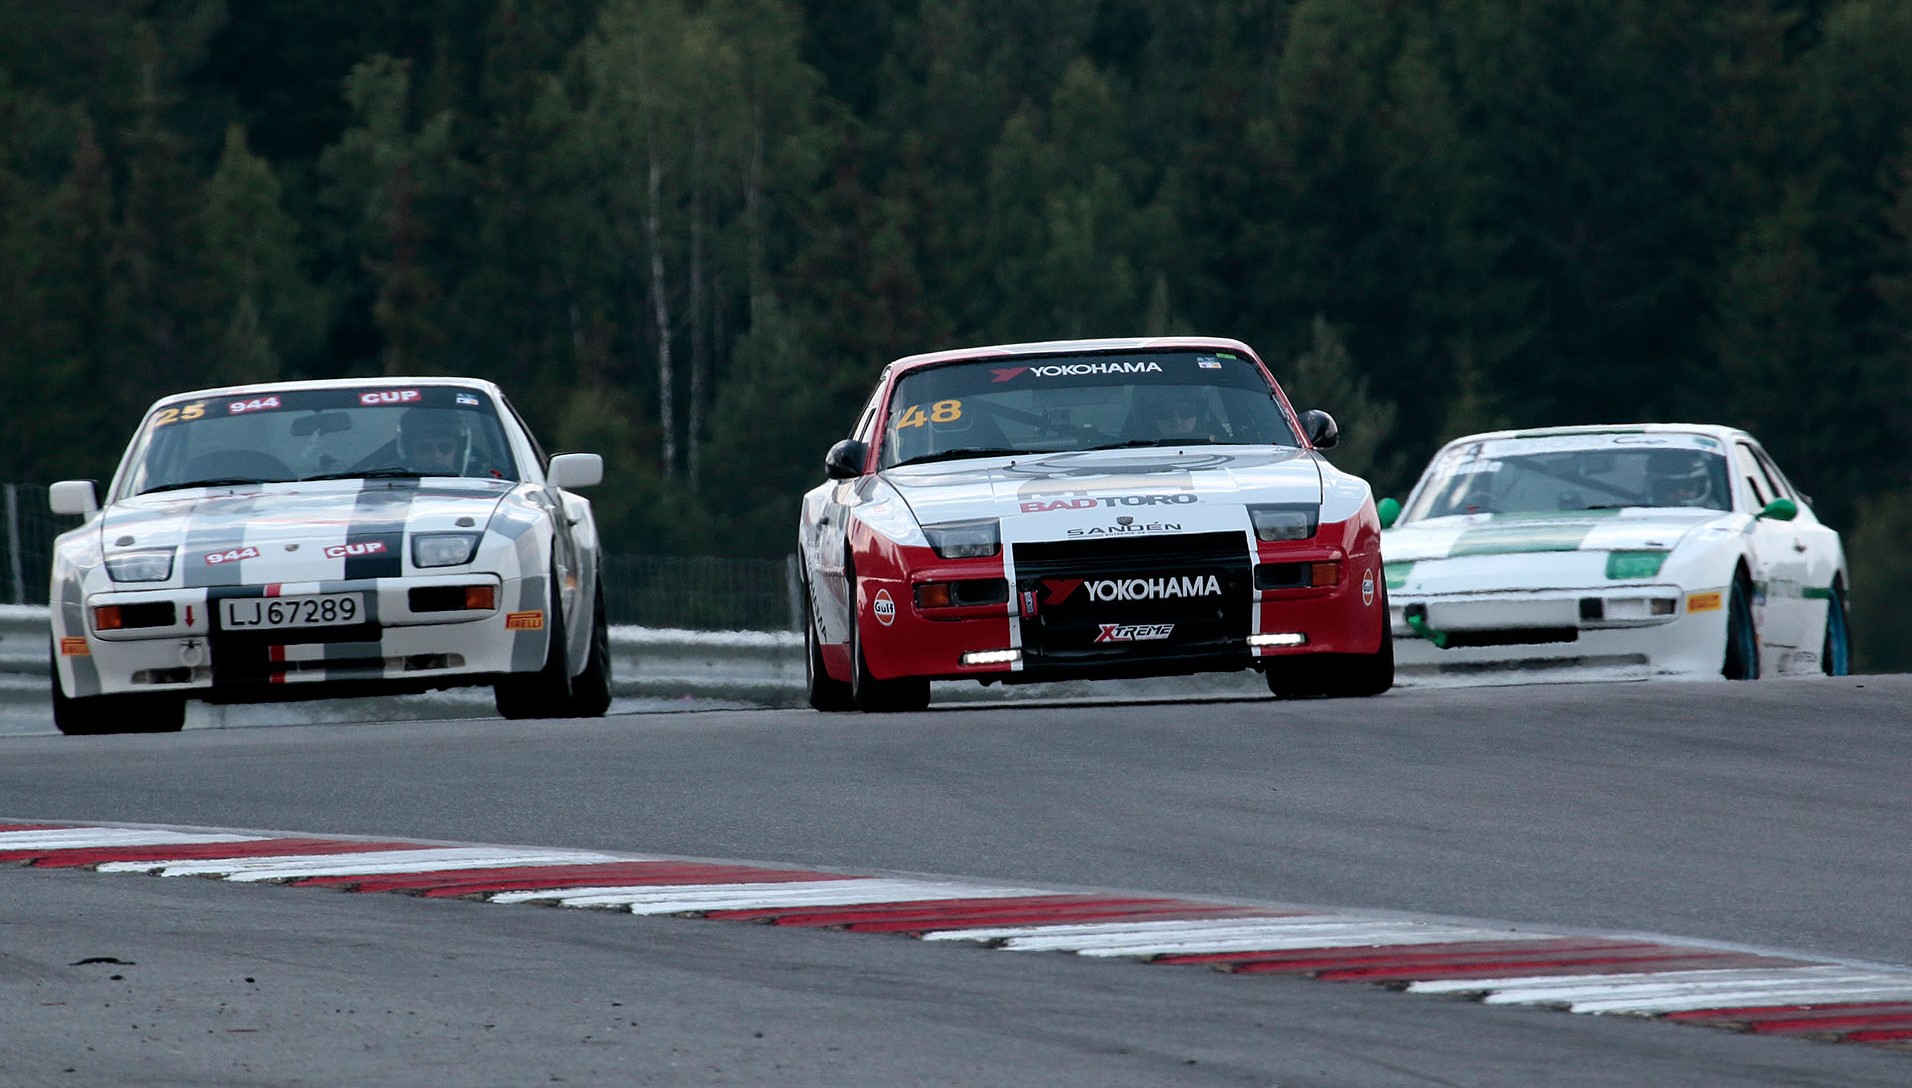 EBC-Equipped Norwegian Porsche 944 Cup Racer Claims Gold in Latest Round